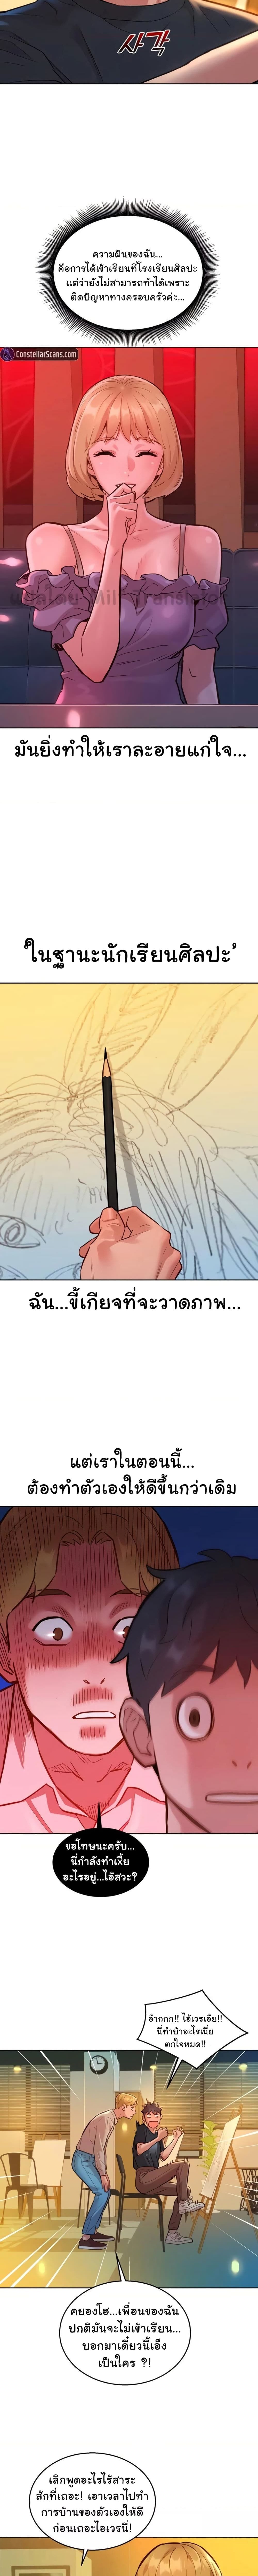 Let’s Hang Out from Today ตอนที่ 22 ภาพ 7